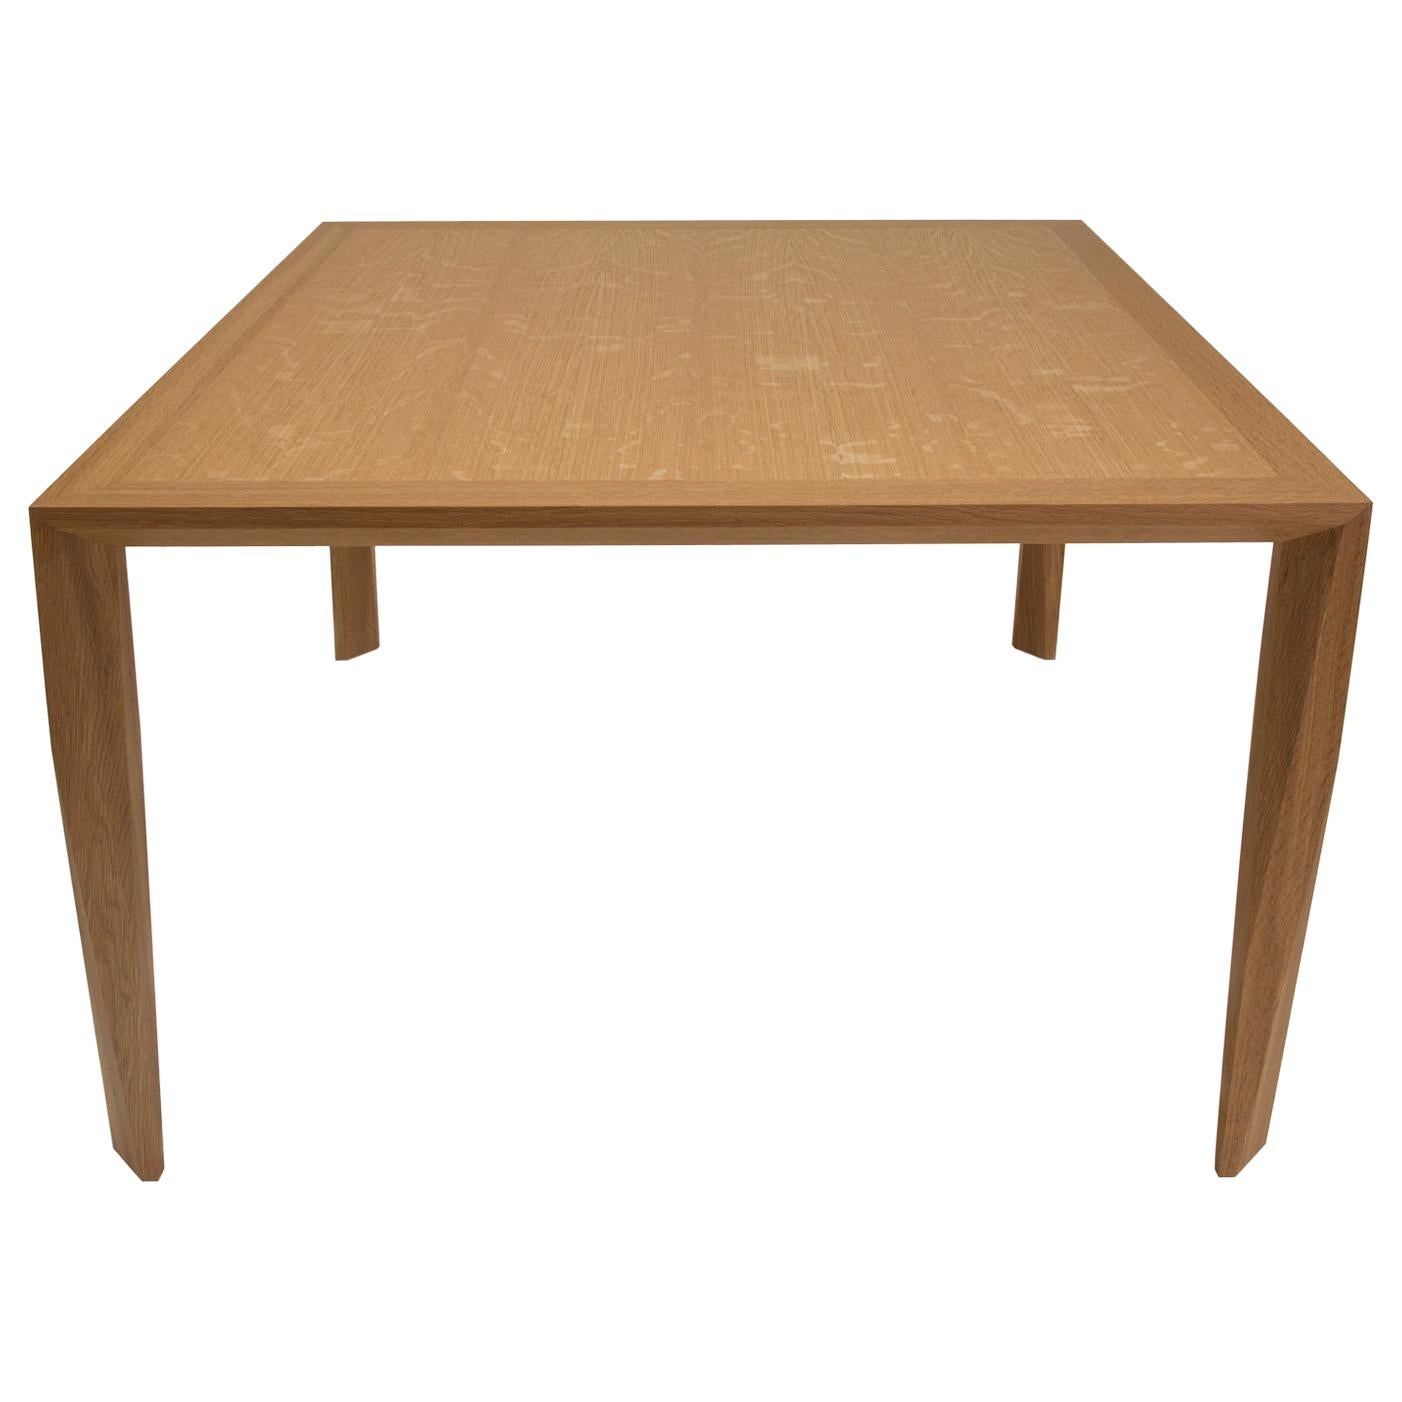 Modern Wood Dining Table, in White Oak, by Studio DiPaolo